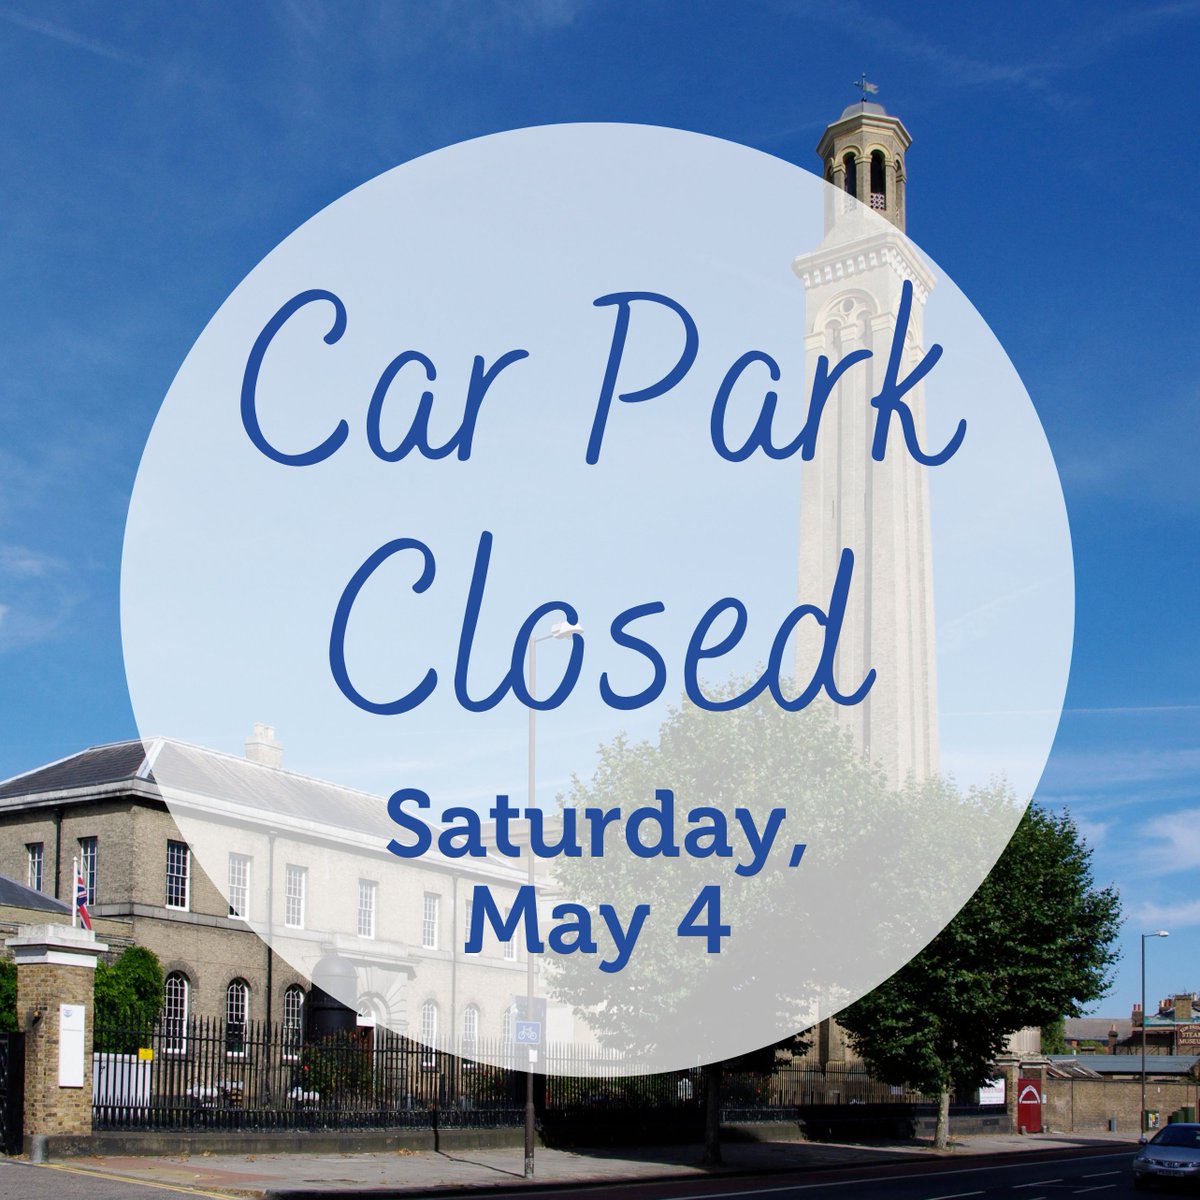 The Museum car park will be closed Saturday May 4 for the Brentford FC home match. Luckily the best way to get to the museum is by public transport, head to our website for how to find us. waterandsteam.org.uk/plan-your-visi…